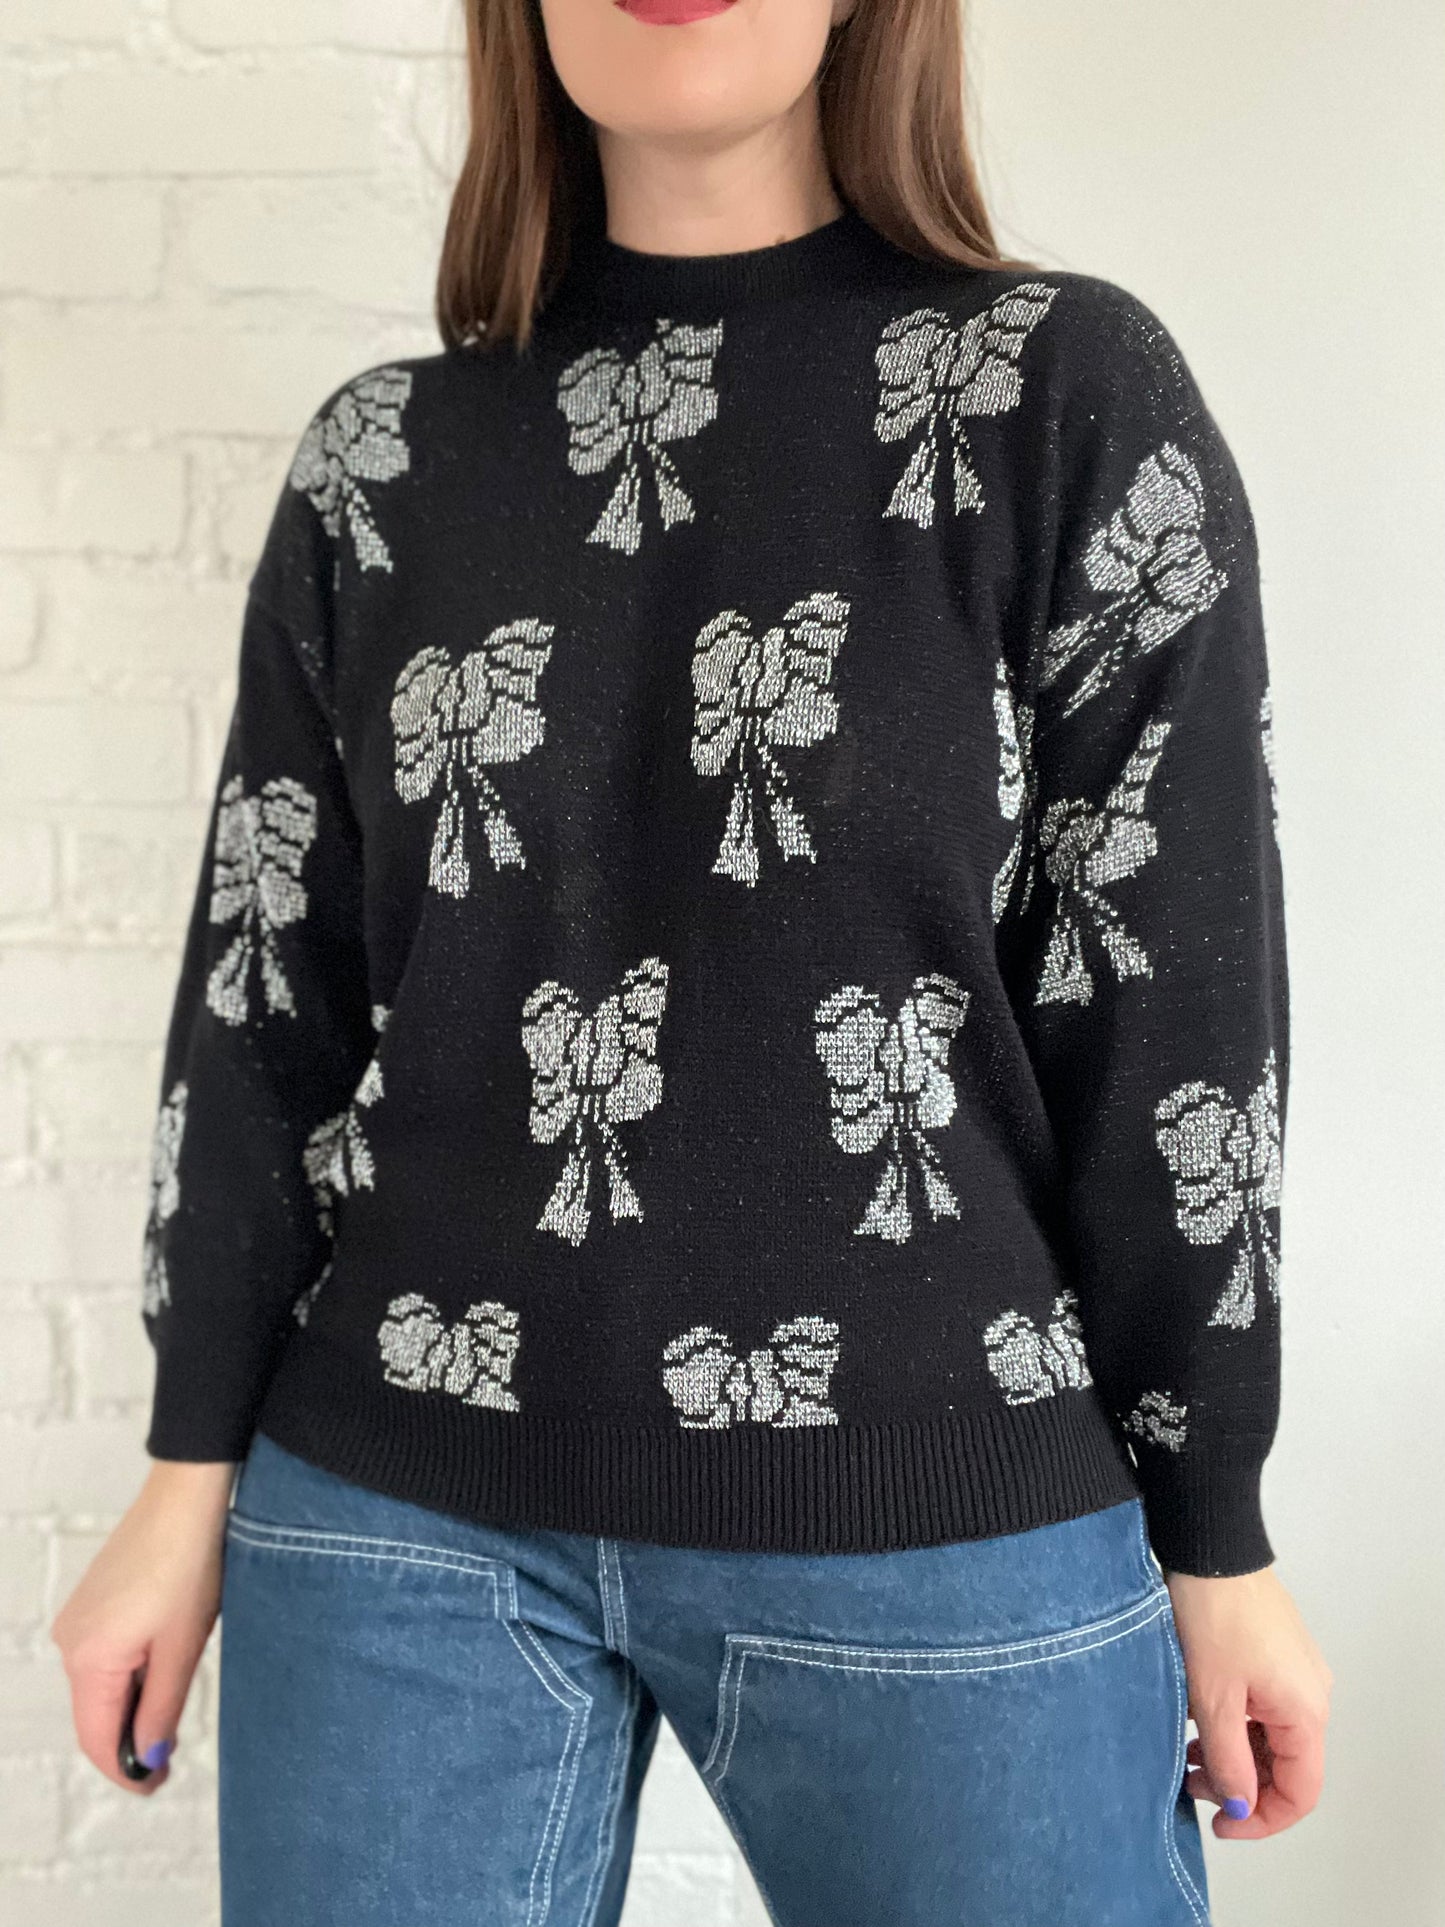 Silver Bows Sweater - S/M